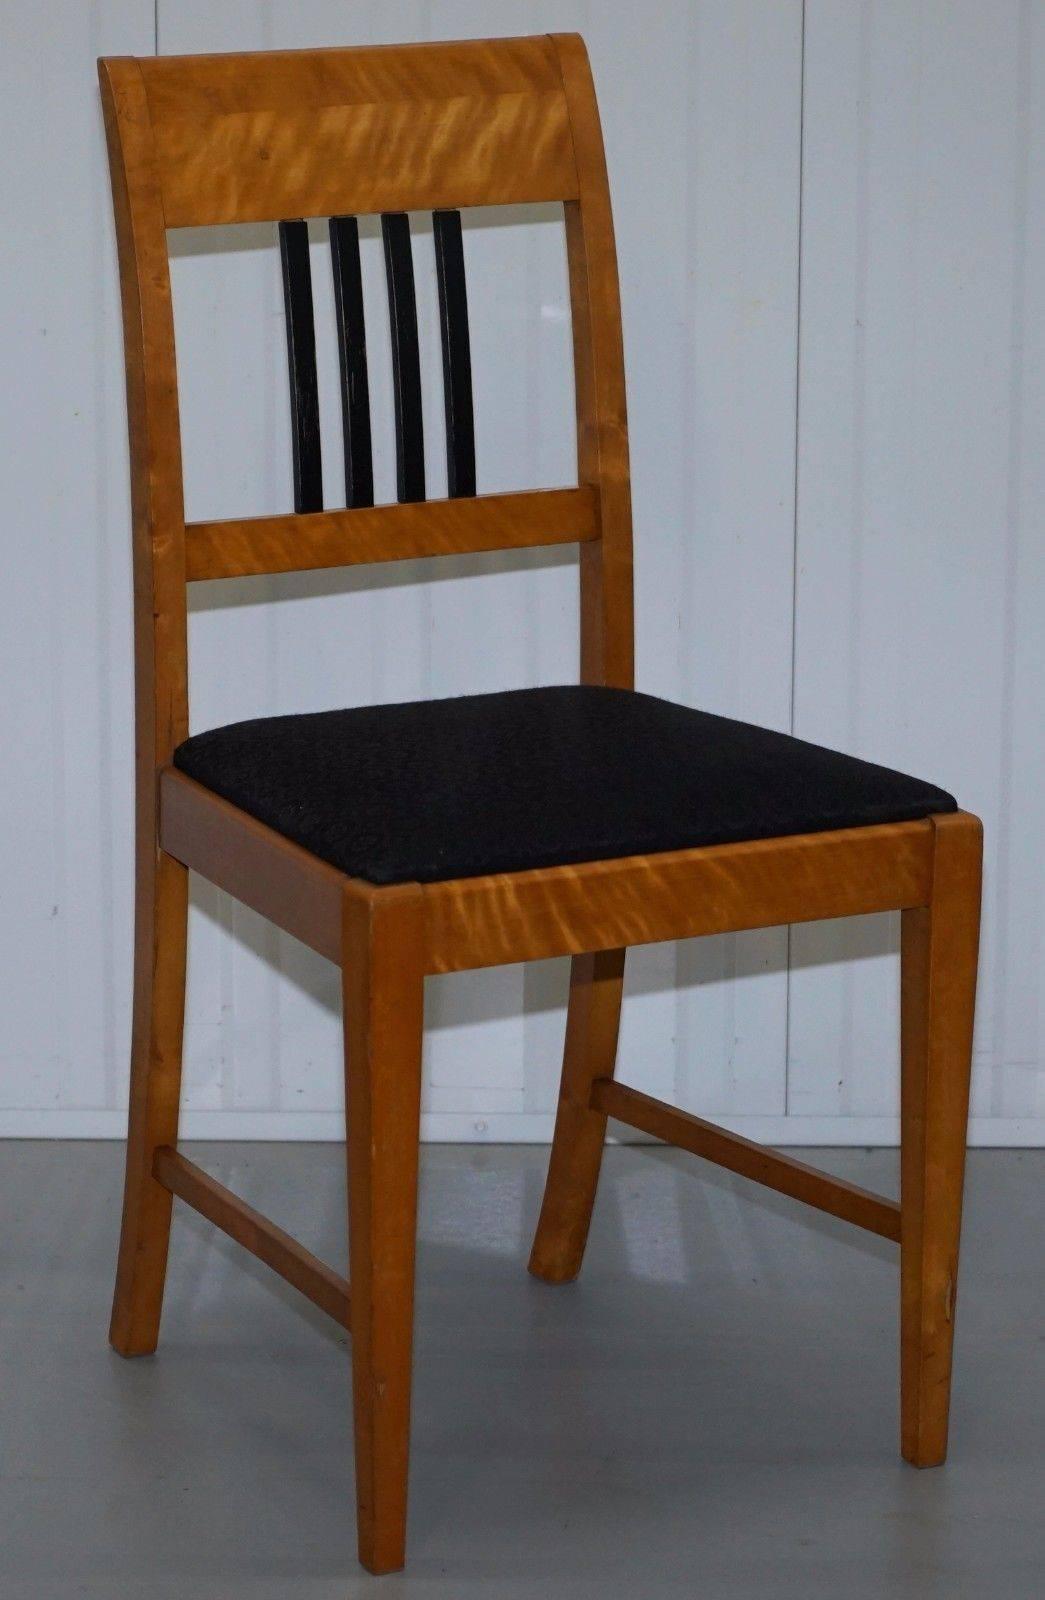 Wimbledon furniture

Wimbledon furniture is delighted to offer for sale this stunning set of 12 original satin birch Biedermeier dining chairs



A really rare find and in stunning vintage condition throughout, we have lightly cleaned waxed